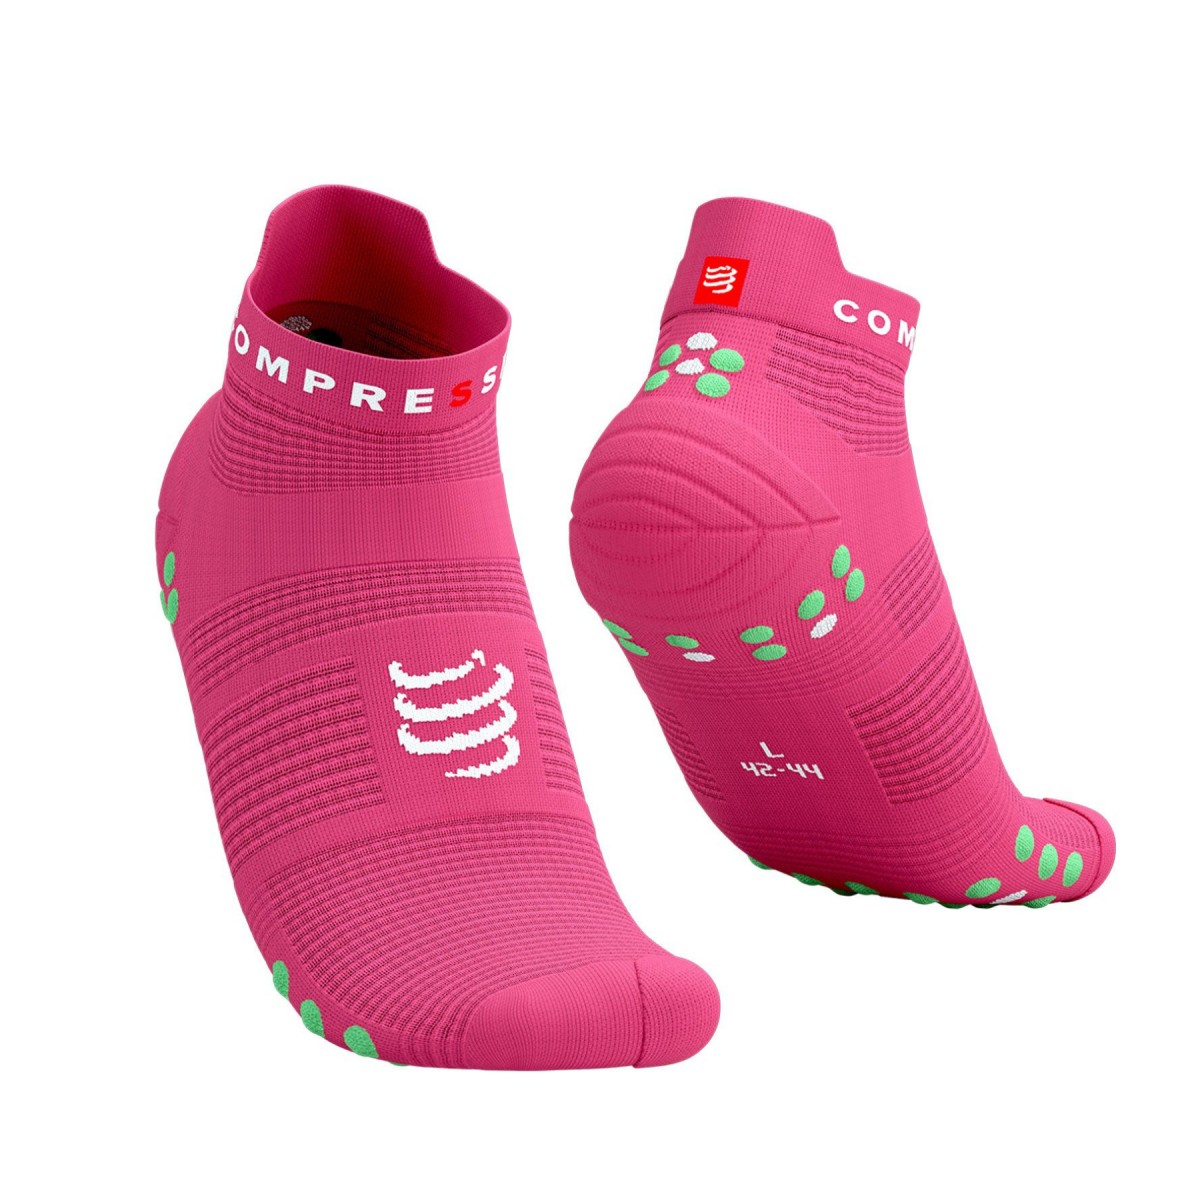 Chaussettes Compressport Pro Racing v4.0 Run Low Rose